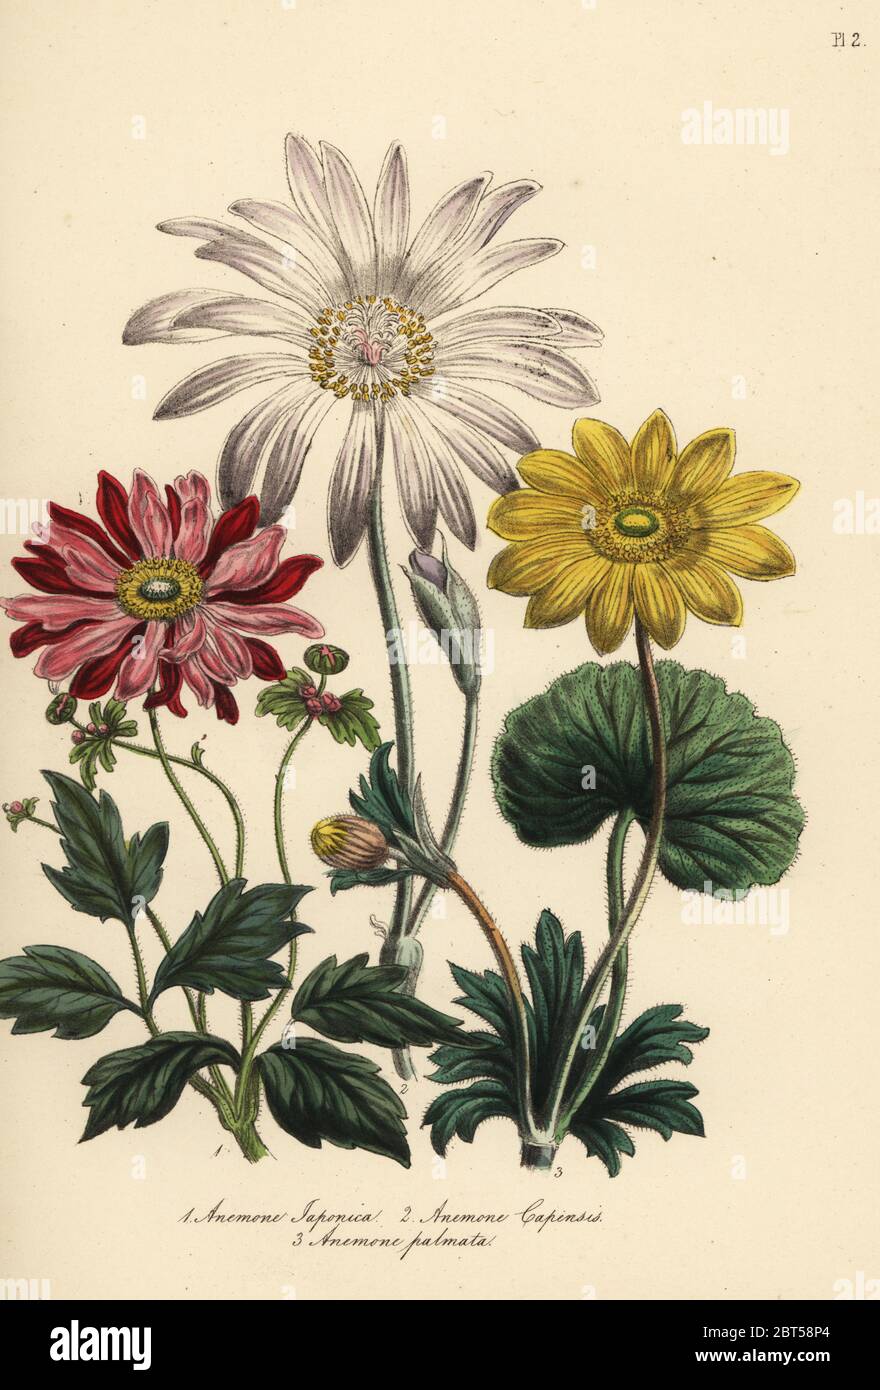 Anemone species: Japanese anemone, Anemone japonica, Cape anemone, Anemone capensis, and yellow anemone, Anemone palmata. Handfinished chromolithograph by Noel Humphreys after an illustration by Jane Loudon from Mrs. Jane Loudon's Ladies Flower Garden or Ornamental Greenhouse Plants, William S. Orr, London, 1849. Stock Photo